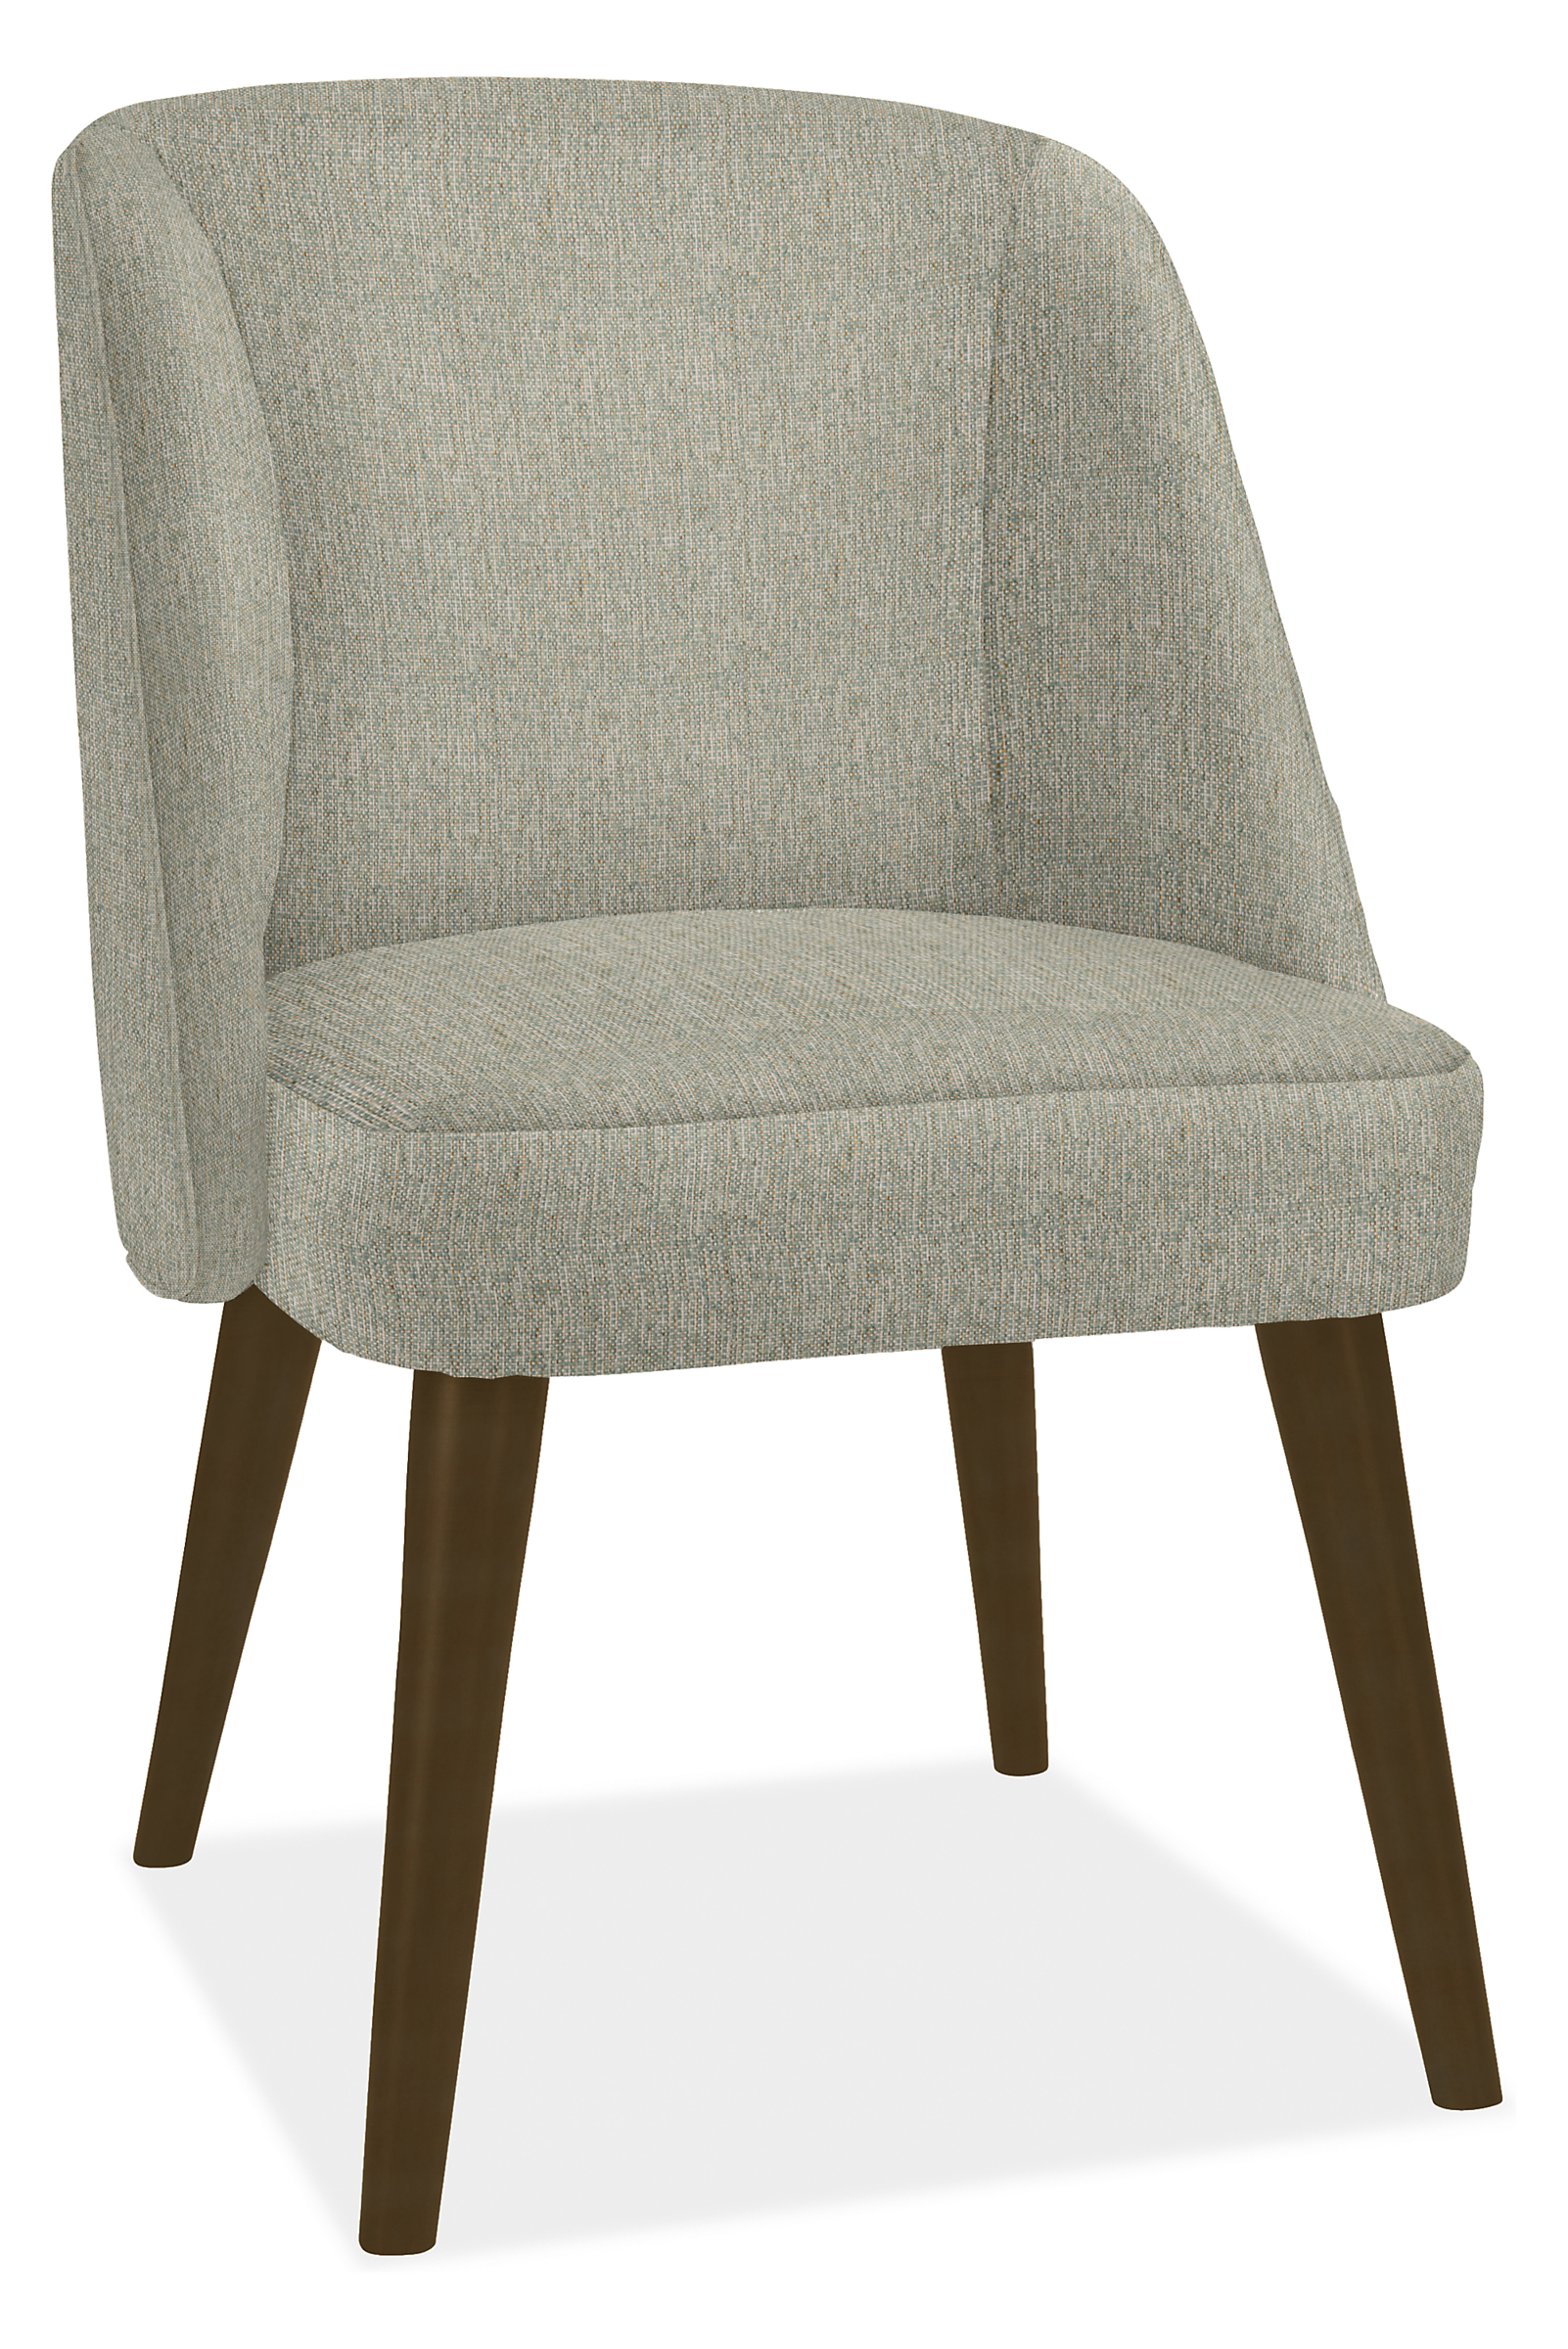 Cora Side Chair in Conley Cloud with Charcoal Legs